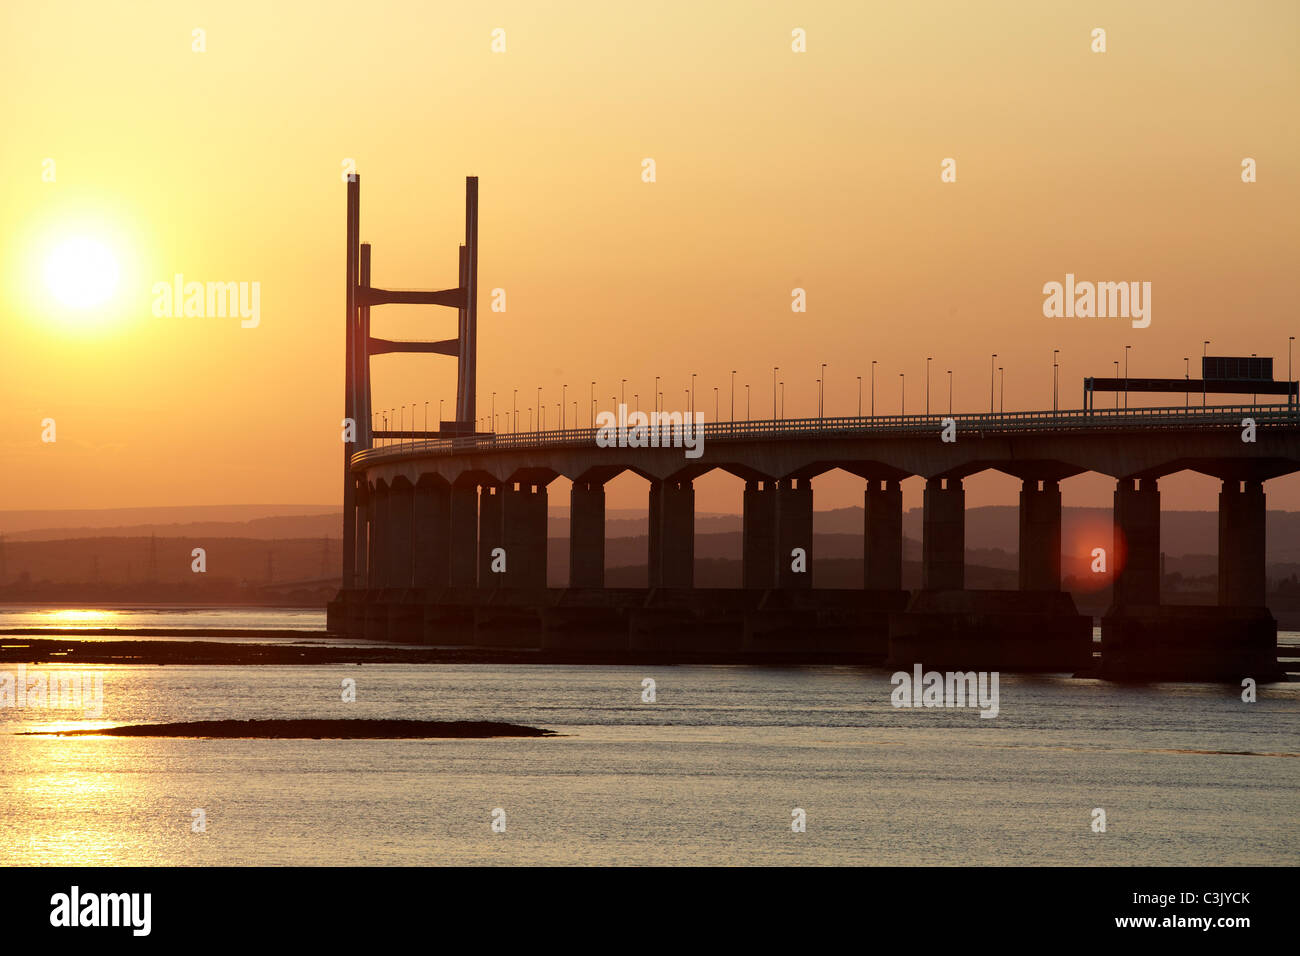 The Second River Severn Bridge Crossing at Dusk. The Bridge connects England to Wales carrying the M4 Motorway. Stock Photo